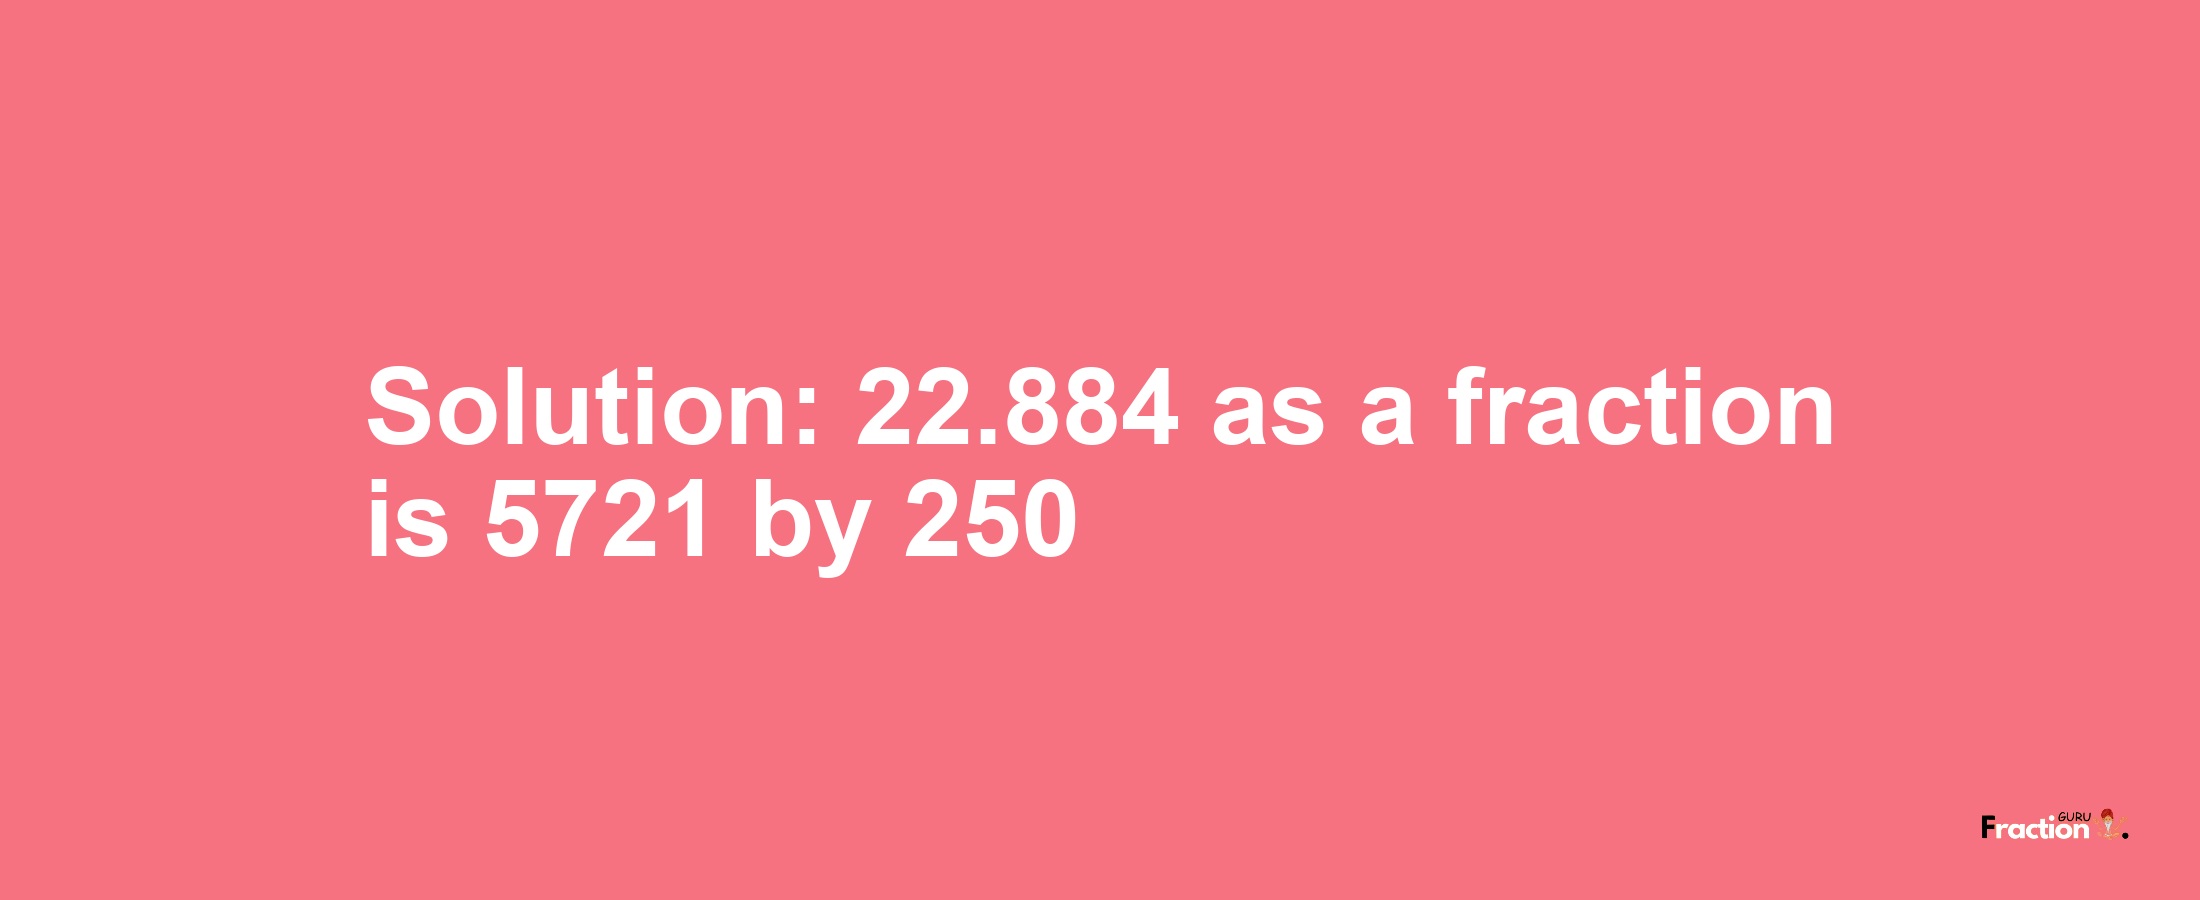 Solution:22.884 as a fraction is 5721/250